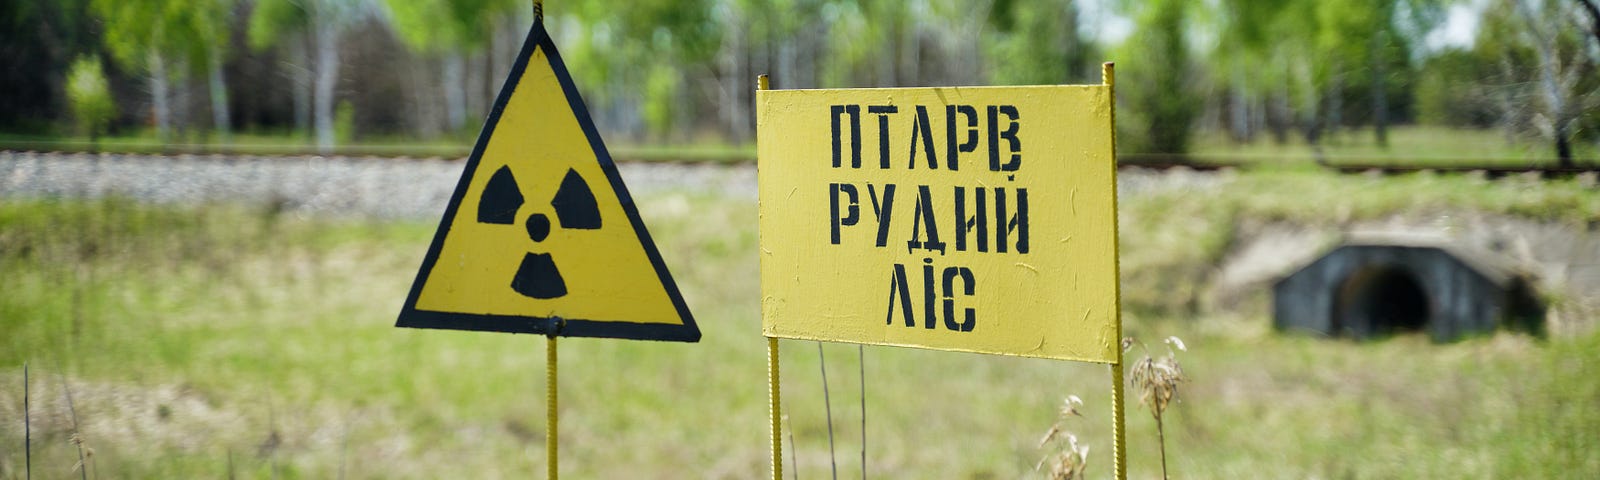 A radiation sign